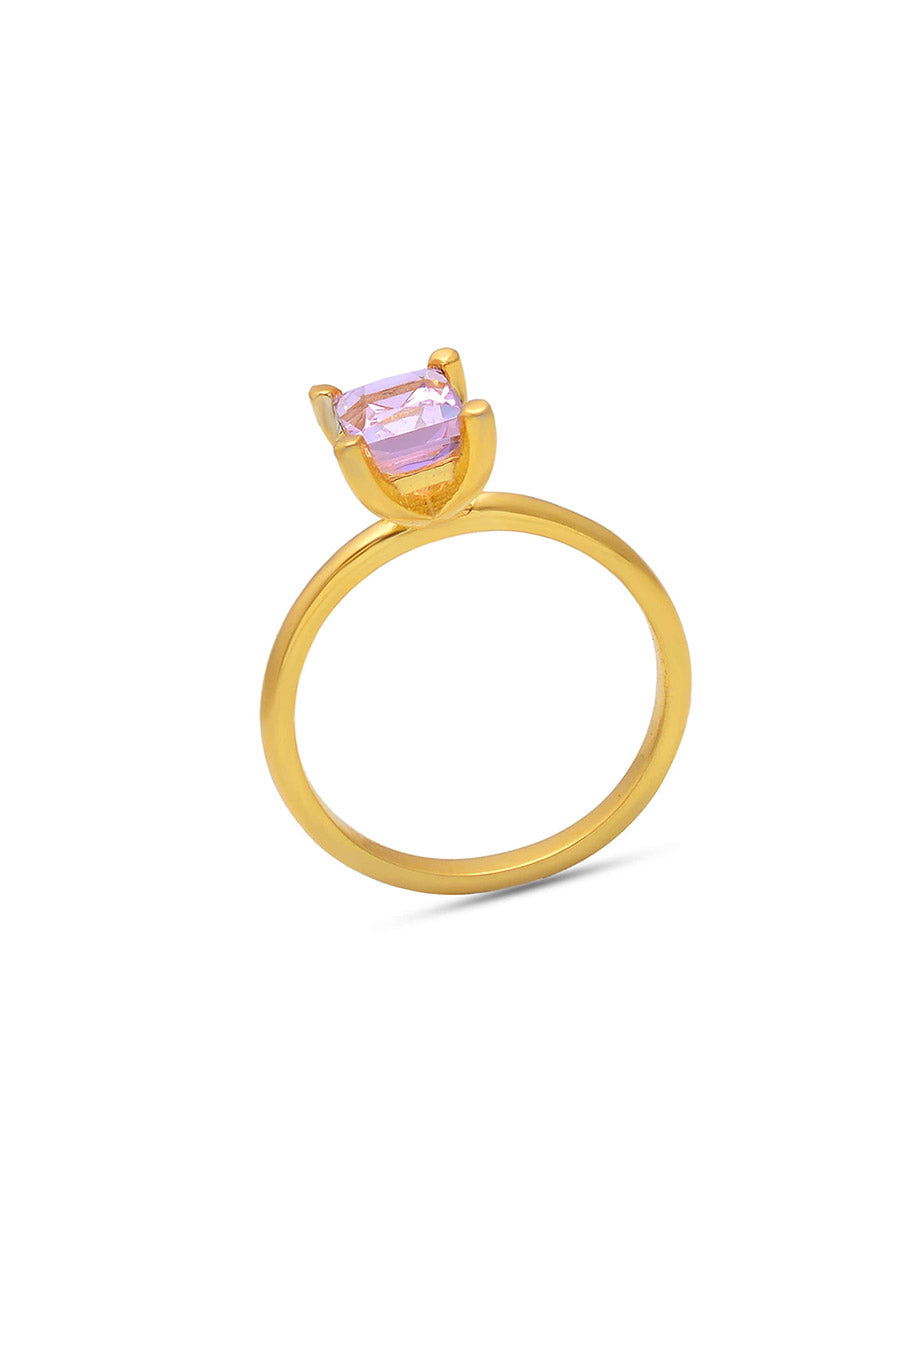 Morganite Octagon Solitaire Ring in 925 Silver